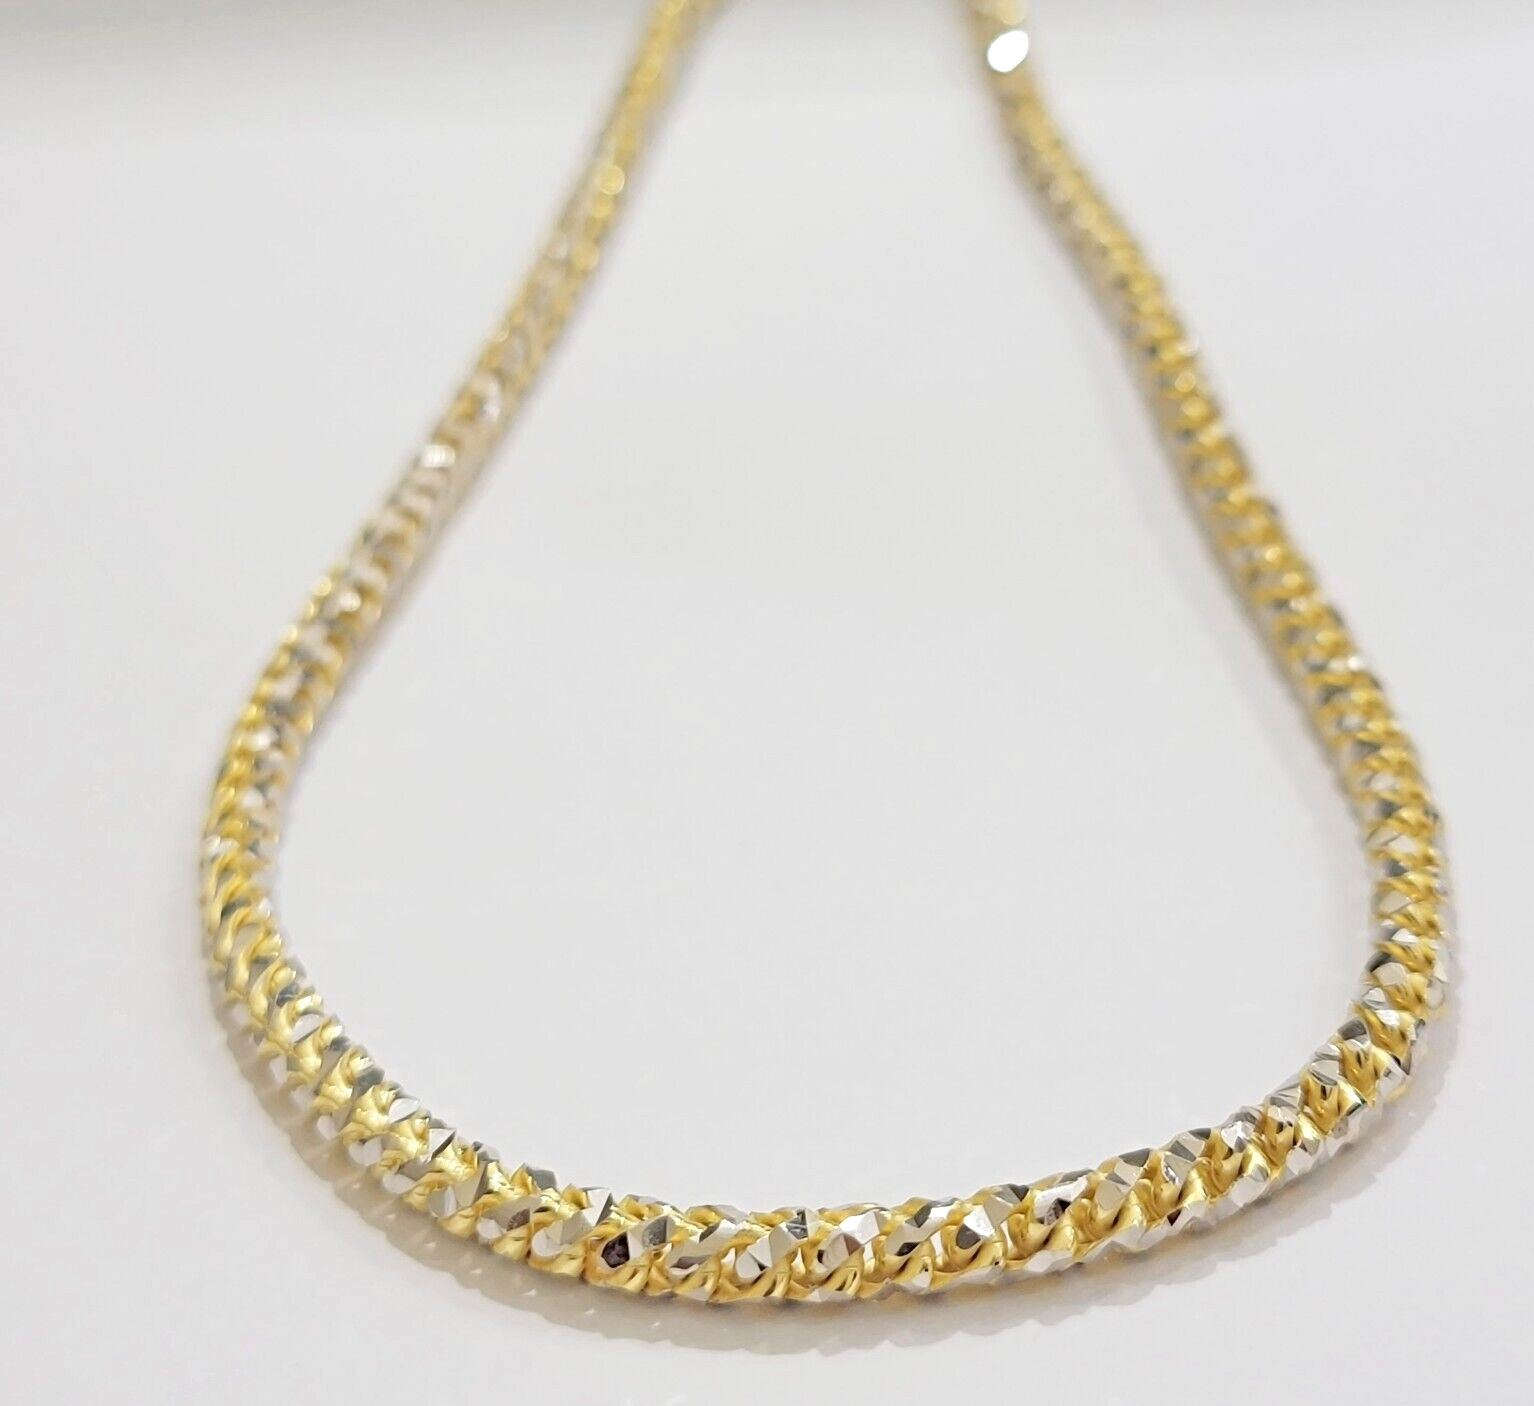 Solid 10k Yellow Gold Palm Box Chain Necklace Diamond cuts 4mm 26